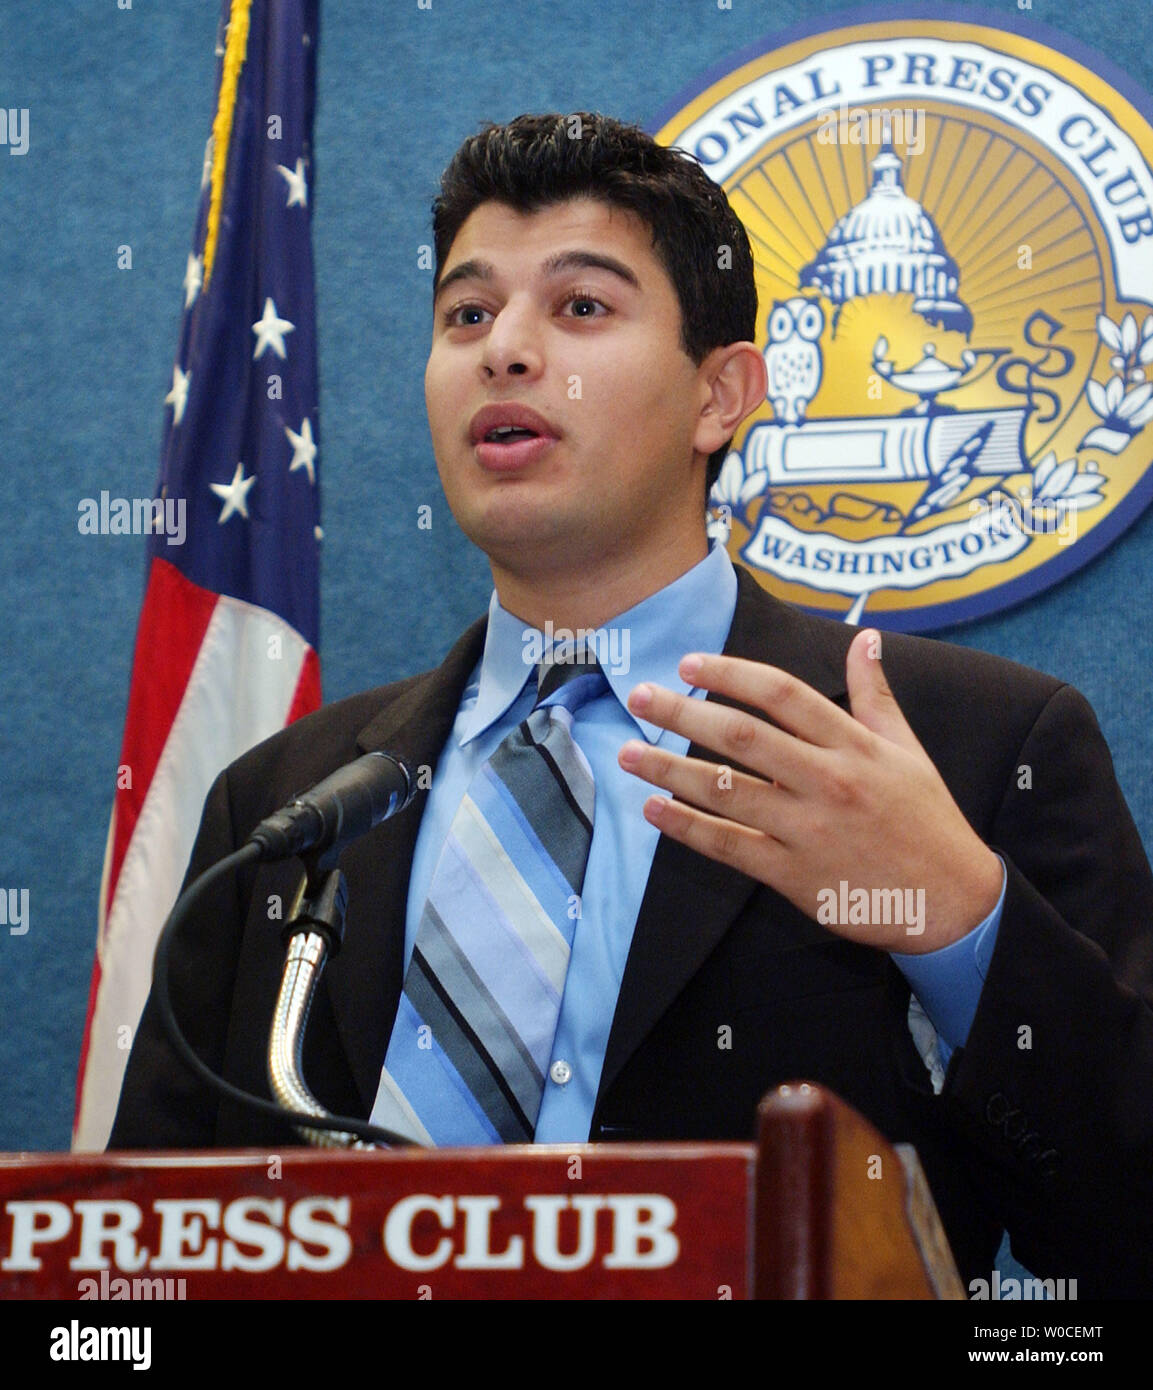 George Farah, Executive Director for Open Debates, speaks to those gathered at a news conference at the National Press Club in Washington on September 7, 2004.  Mr. Farah's new book, 'No Debate: How the Republican and Democratic Candidates Secretly Control the Debate Commission' discusses the implications of the political party's influence on the debate system and it’s their role in the electoral process. (UPI Photo/Michael Kleinfeld) Stock Photo